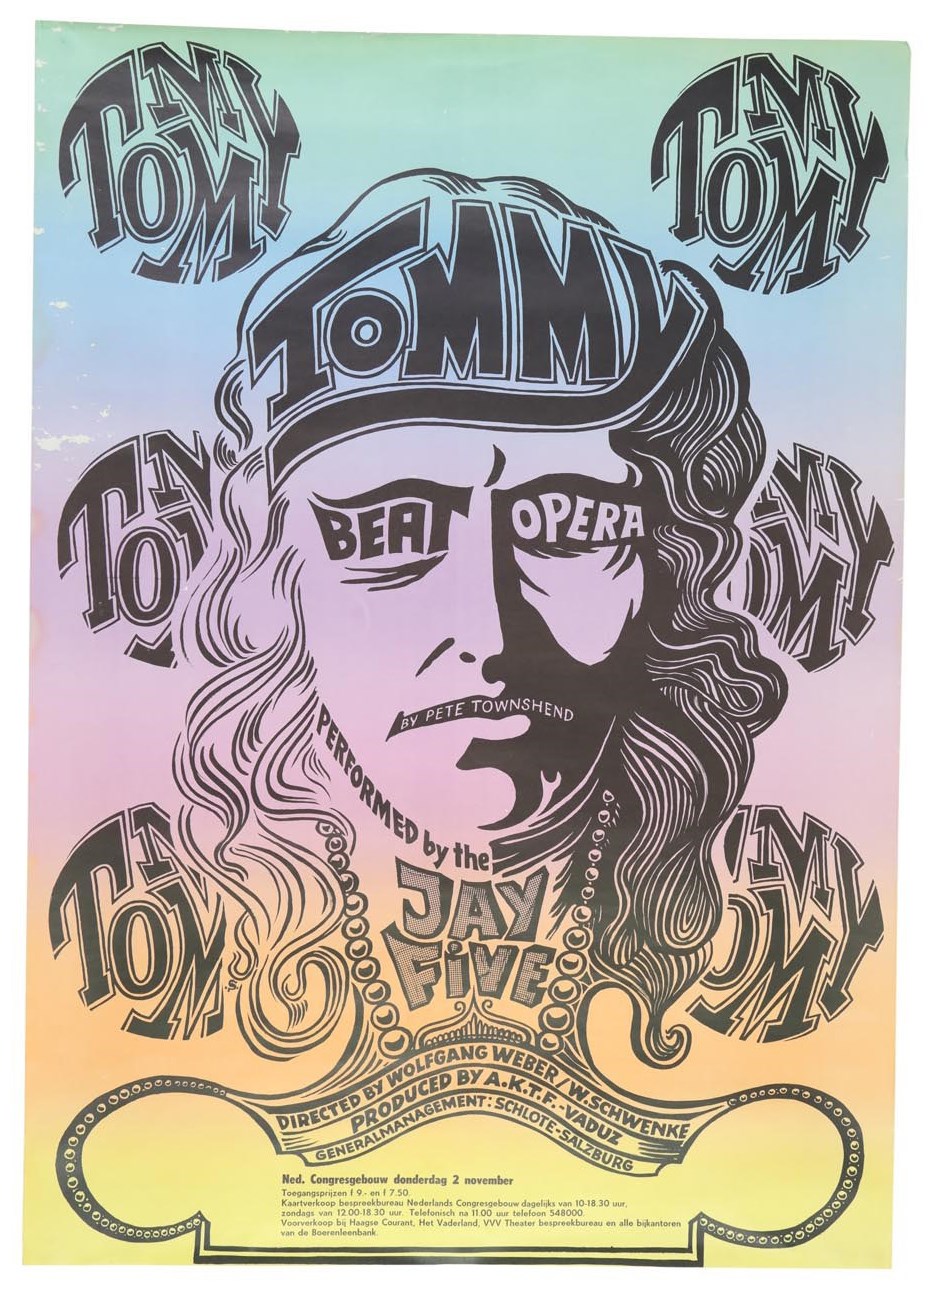 Rock And Pop Culture - 1975 “Tommy” by Pete Townsend Concert Poster